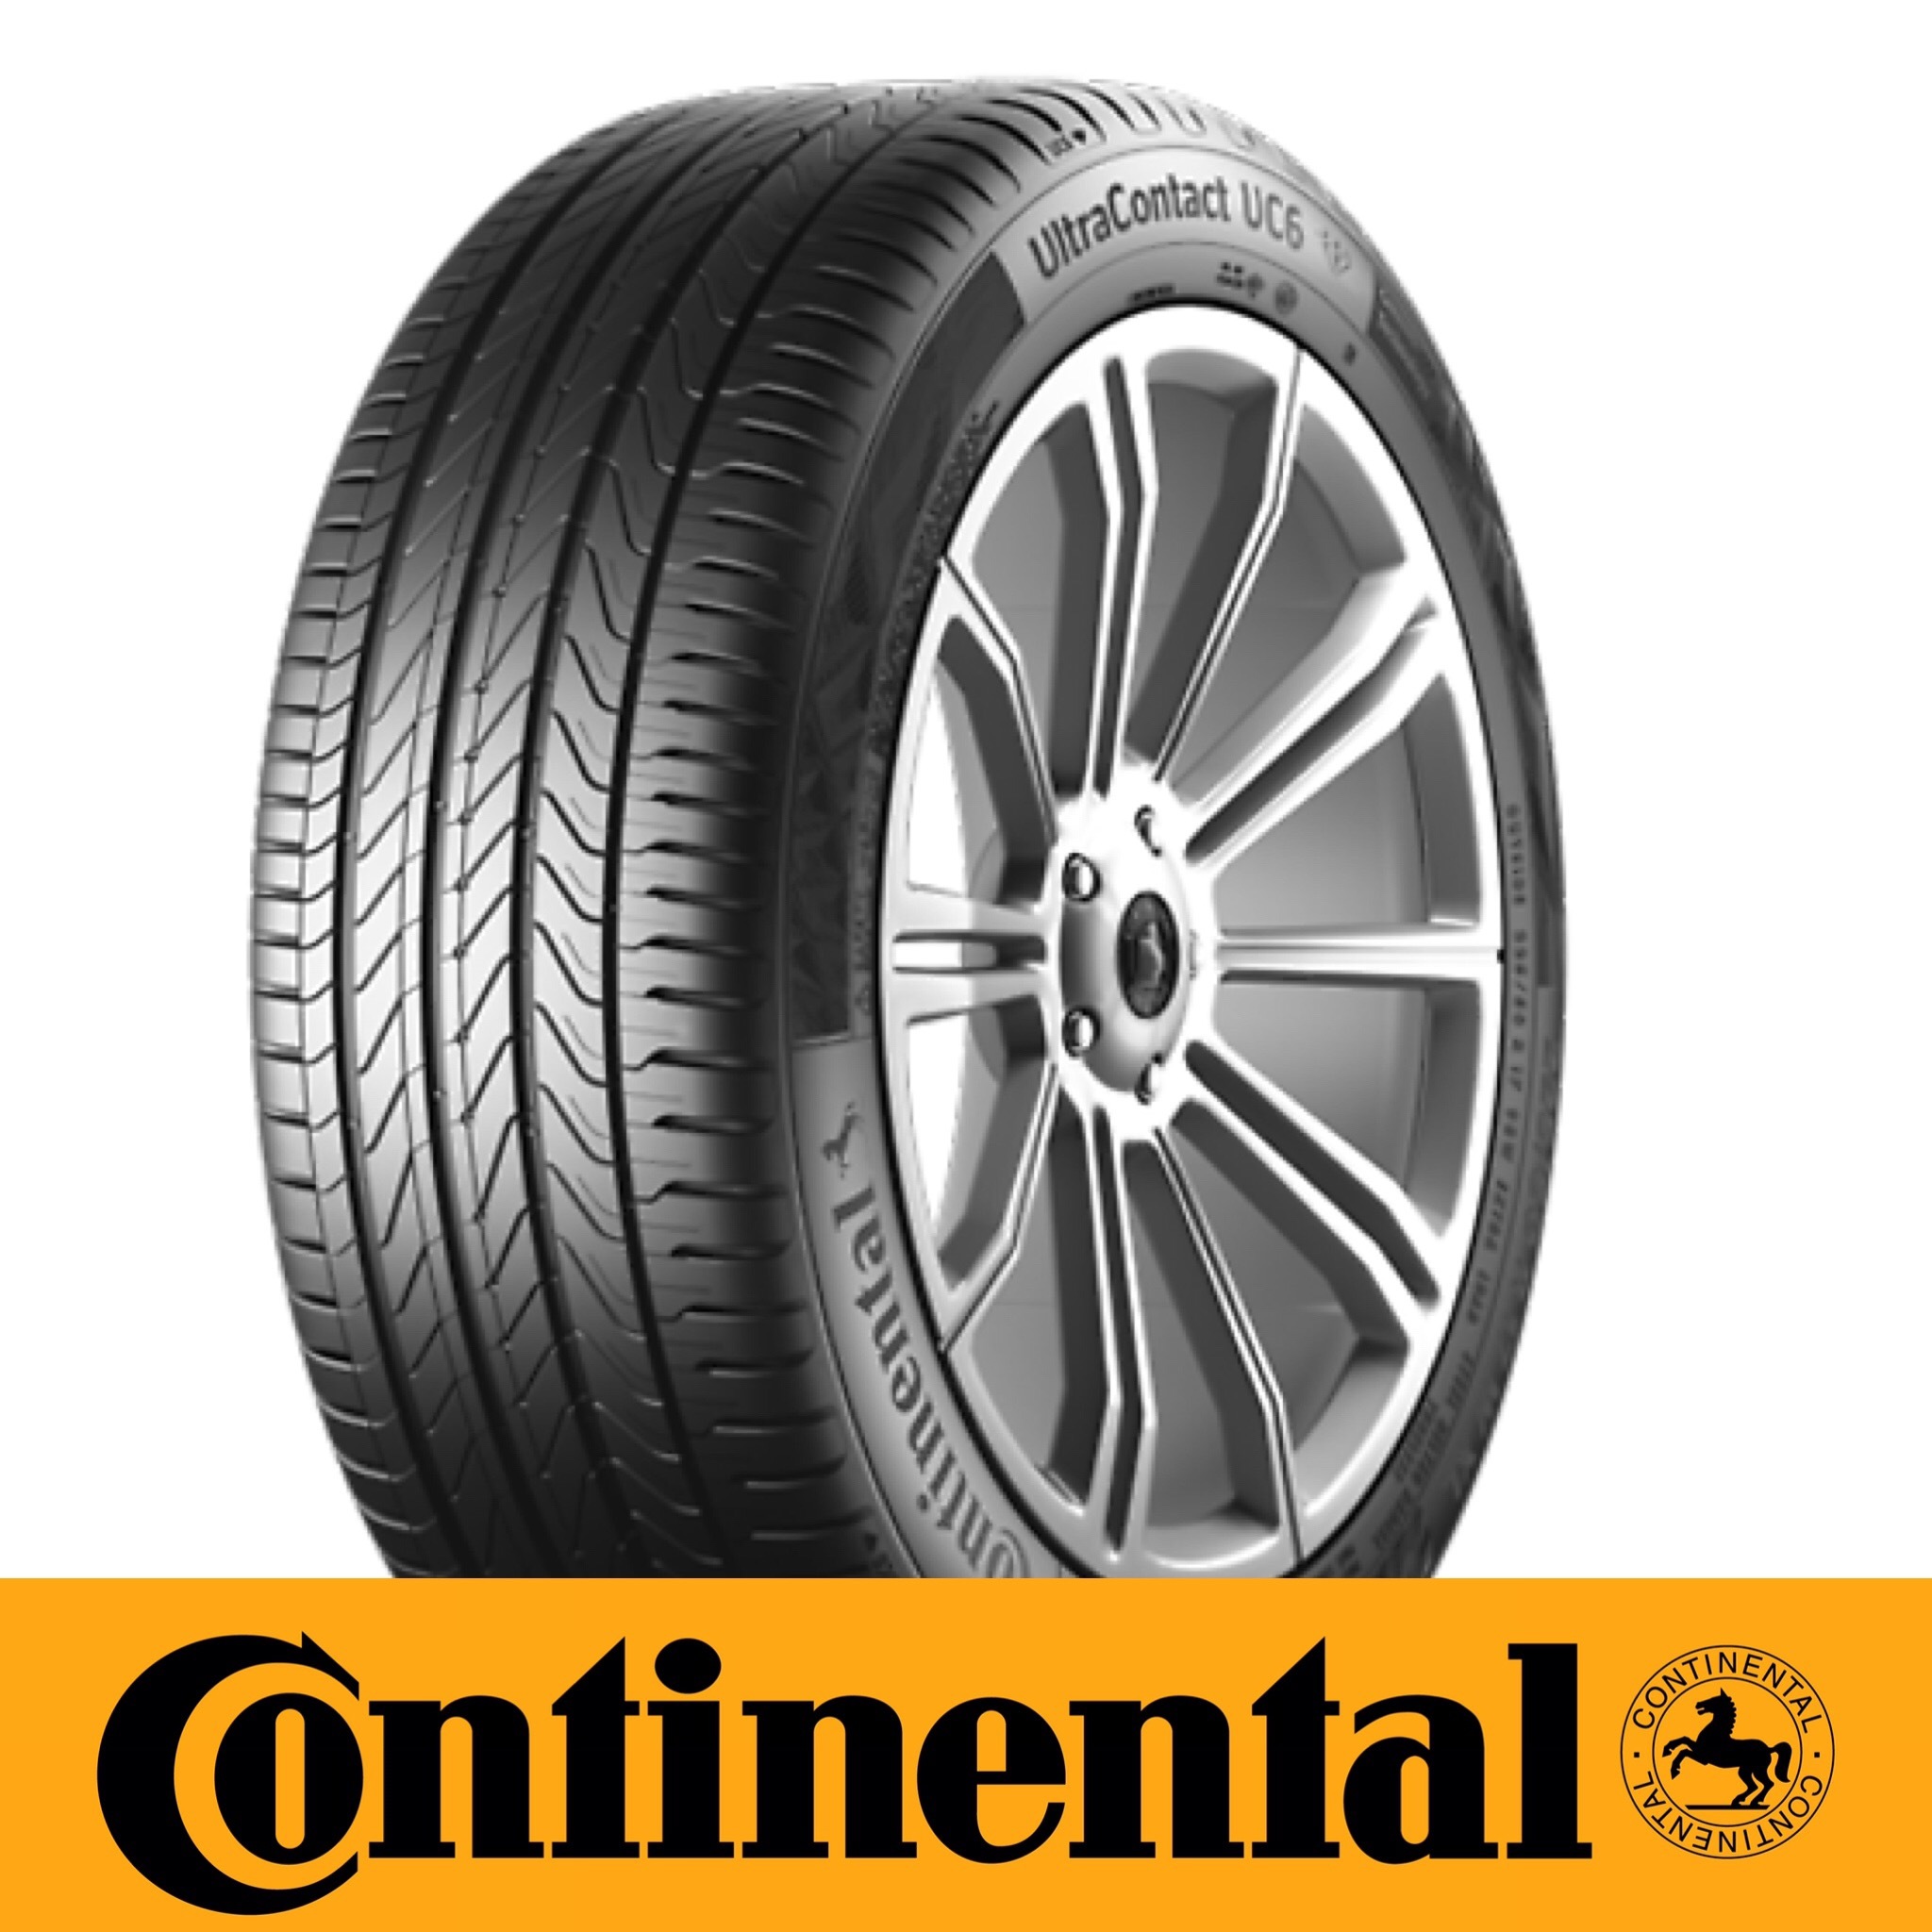 Continental-UltraContact-205-45R16-87W-(b)